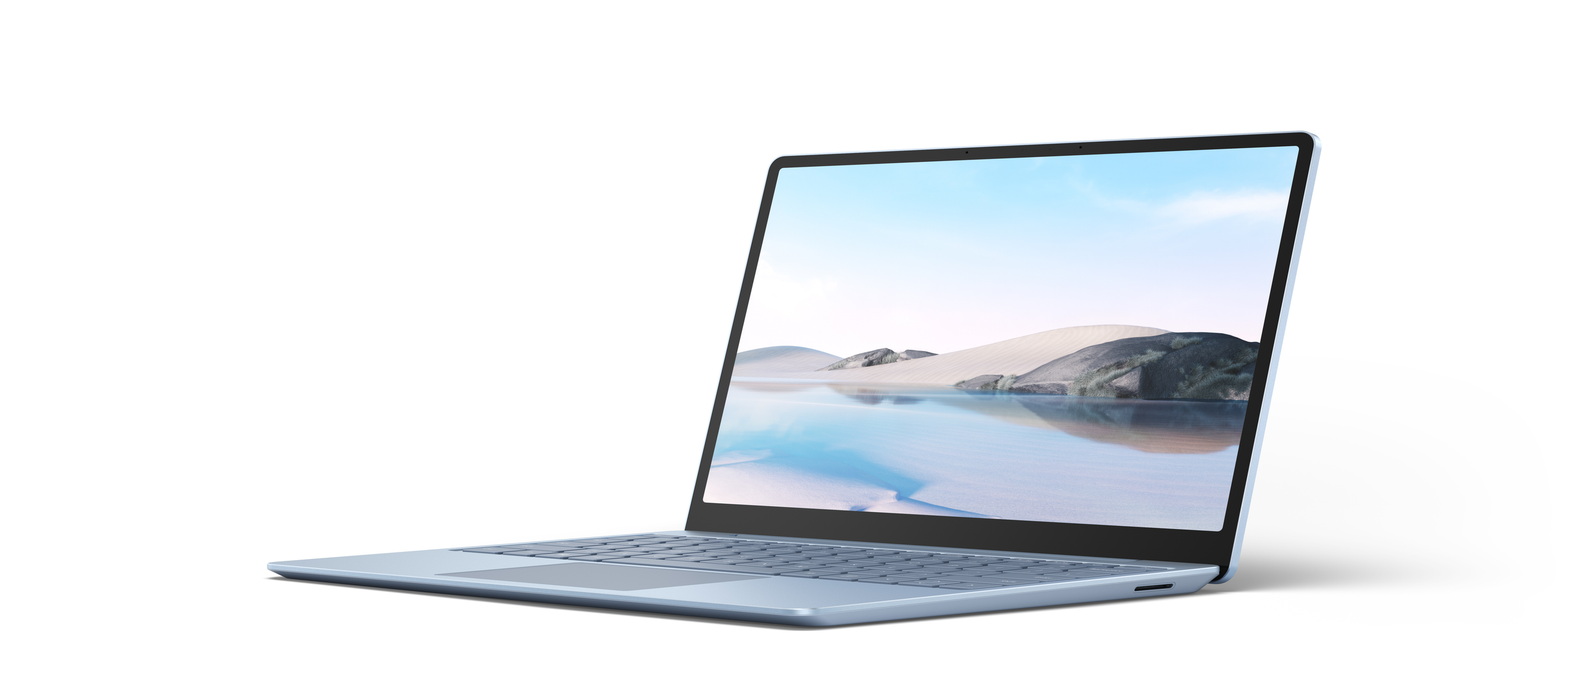 Microsoft Surface Laptop Go, 12.4" Touchscreen, Intel Core i5-1035G1, 8GB Memory, 128GB SSD, Ice Blue, THH-00024